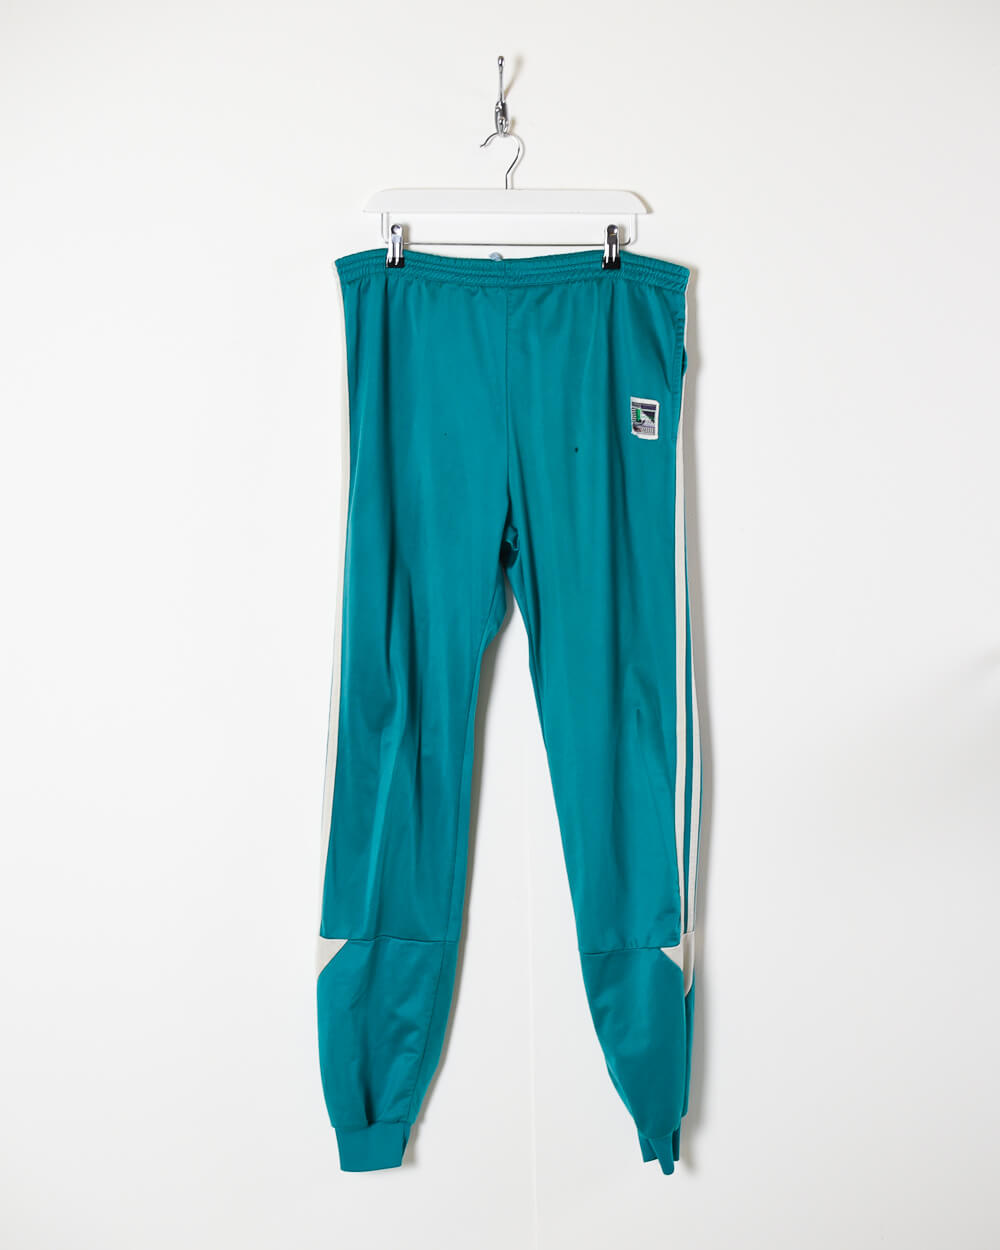 Blue Adidas Experience Tracksuit Bottoms - W34 L36